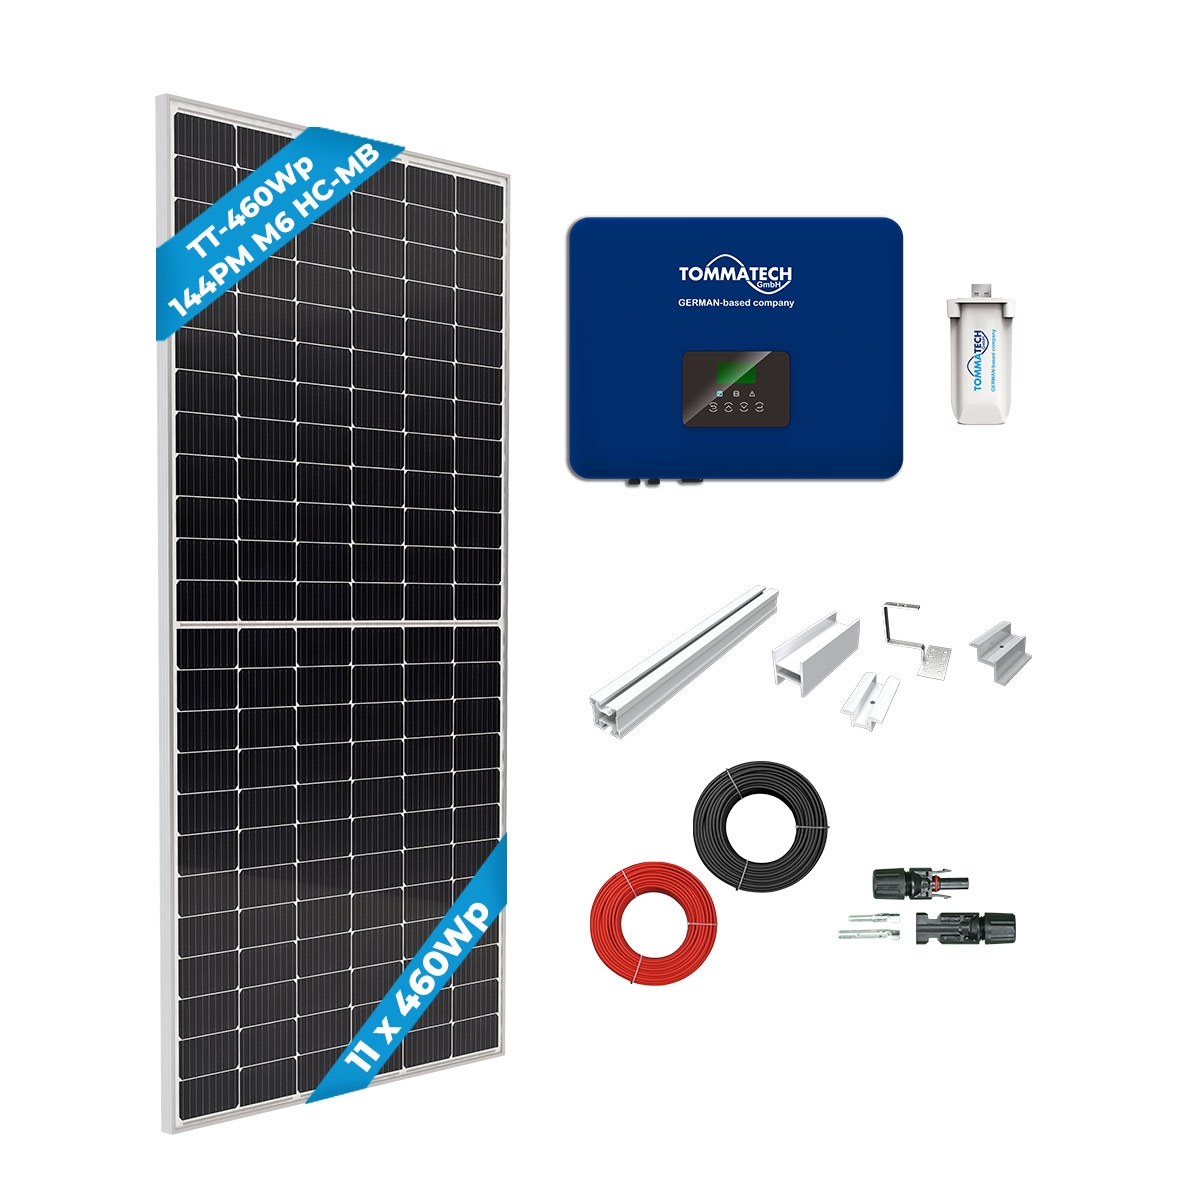 TommaTech 5kWe Tile Roof Three Phase On-Grid Solar Package